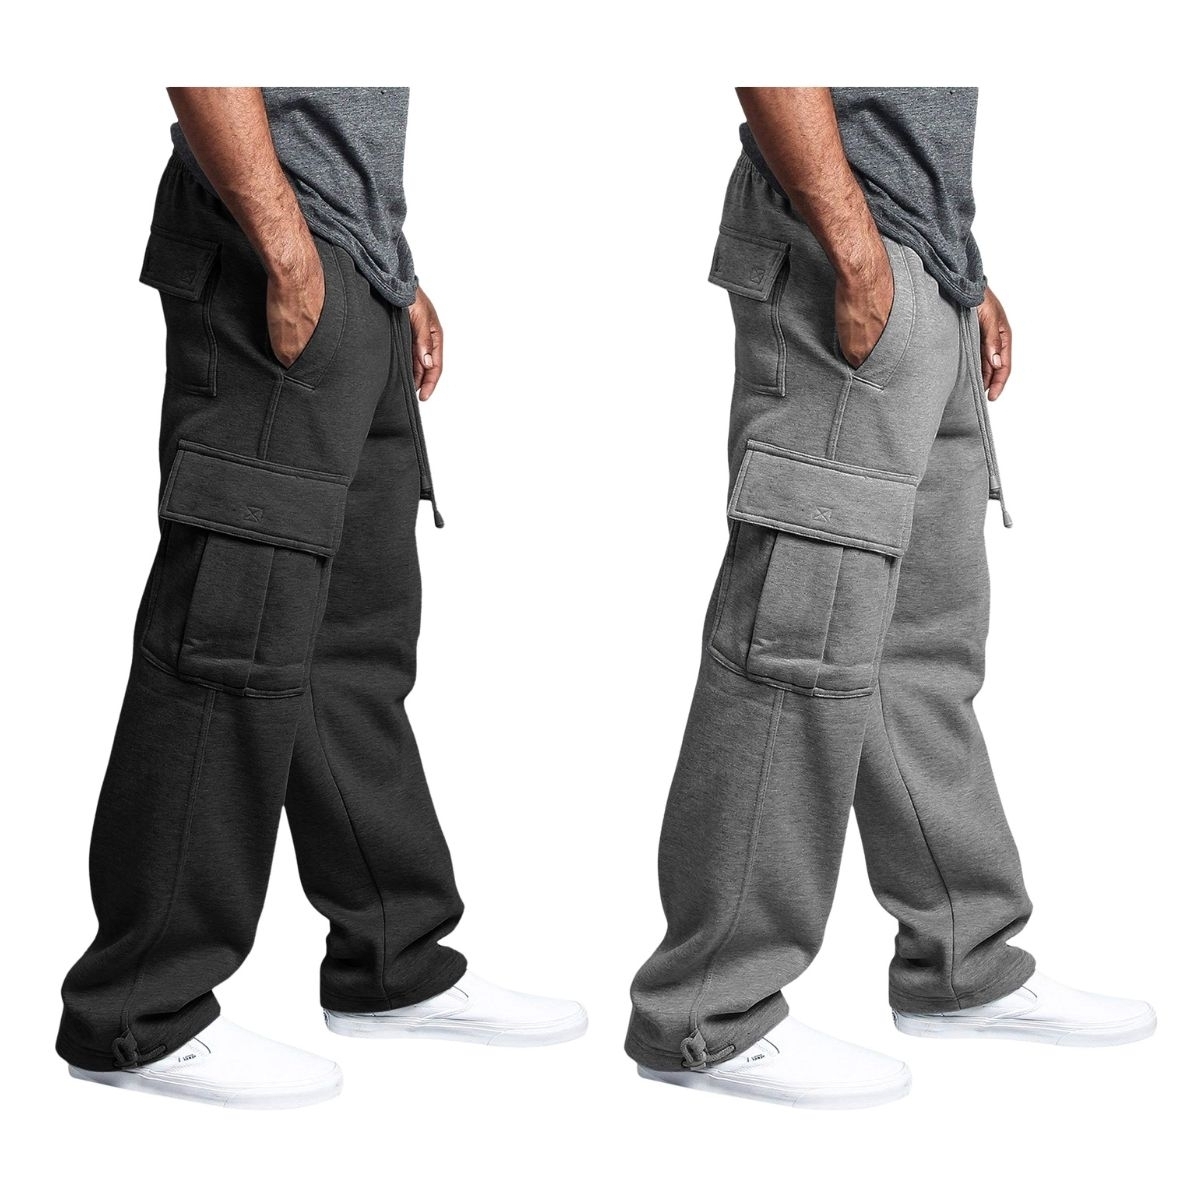 2-Pack: Men's Casual Solid Fleece Lined Cargo Jogger Soft Sweatpants With Pockets - Black&black, Medium